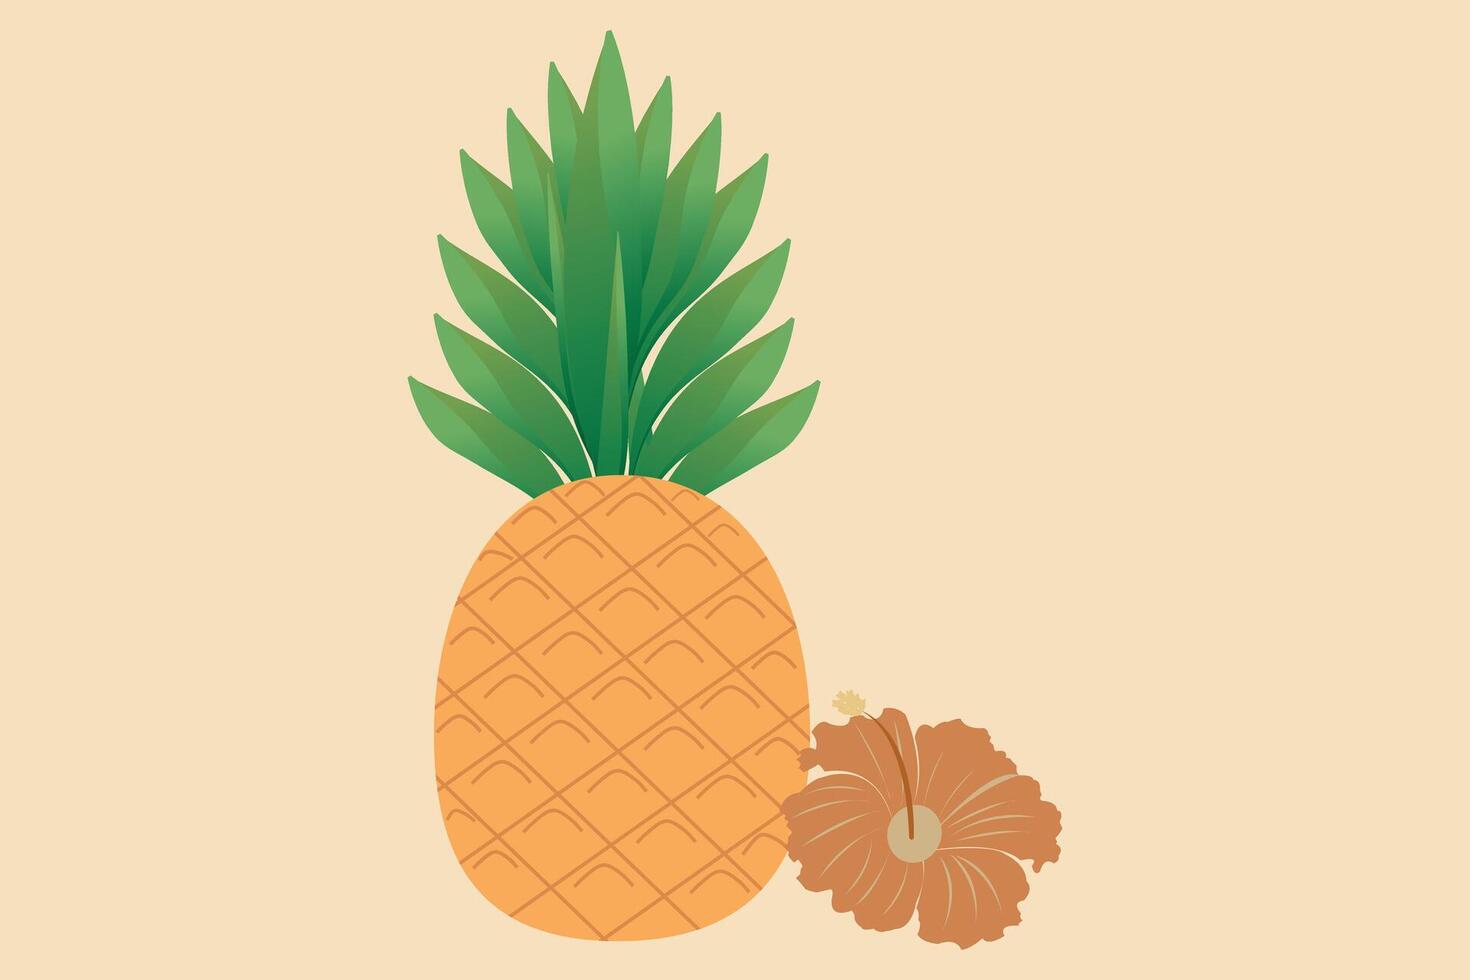 Pineapple exotic fruit with hibiscus flower on a pastel background. Summer tropical natural fruits for a healthy lifestyle. Vector illustration.